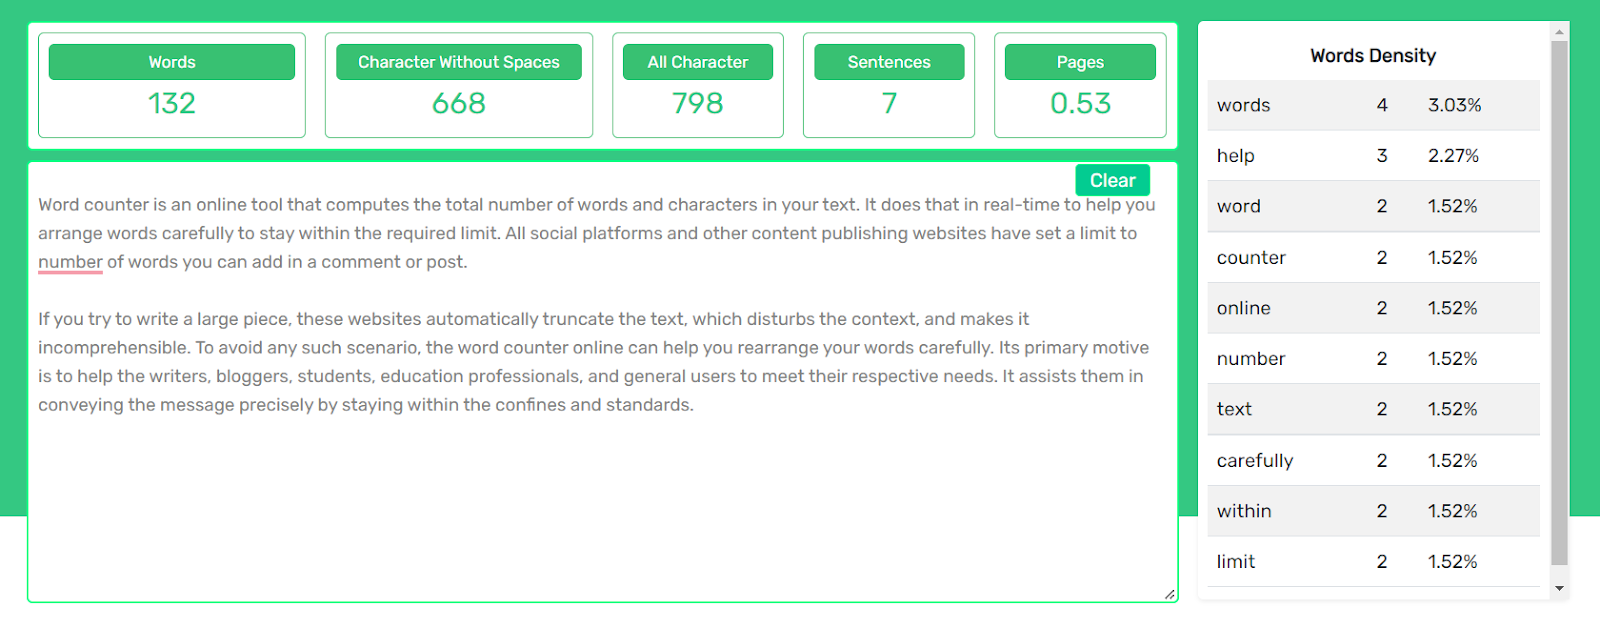 Using a Word Counter Tool